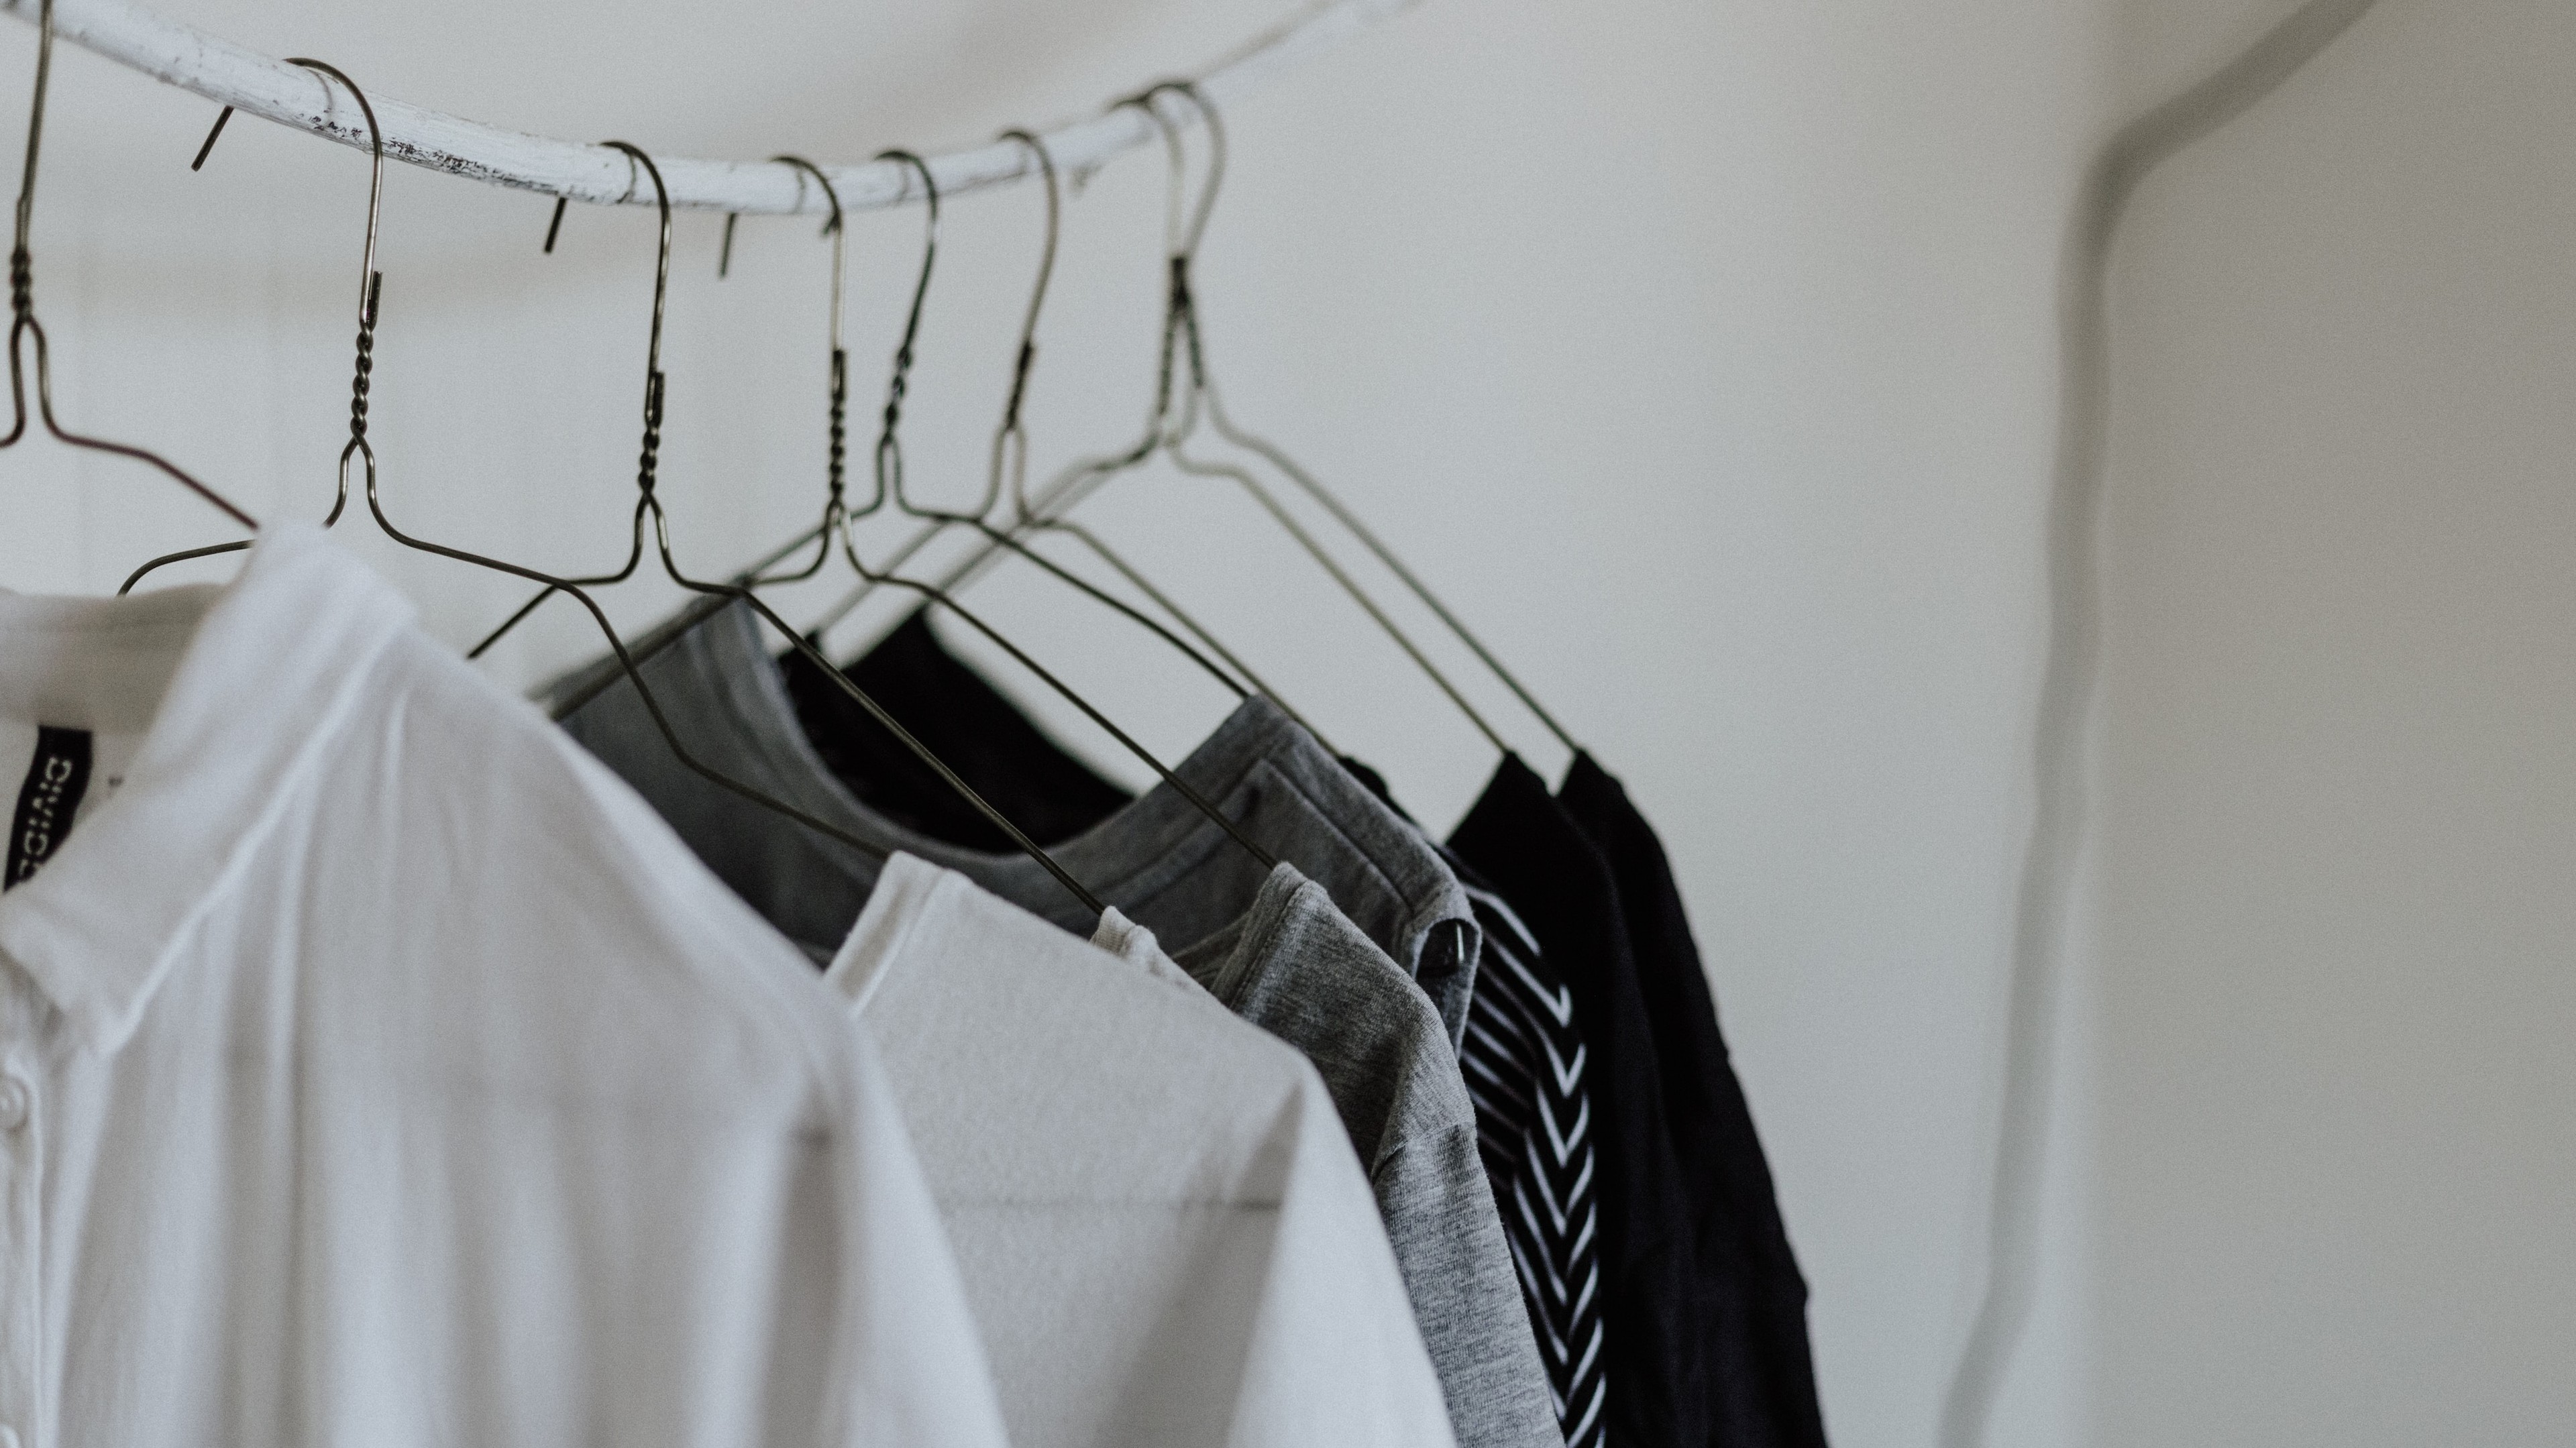 Get Dry Clothes Without a Dryer - Fast!